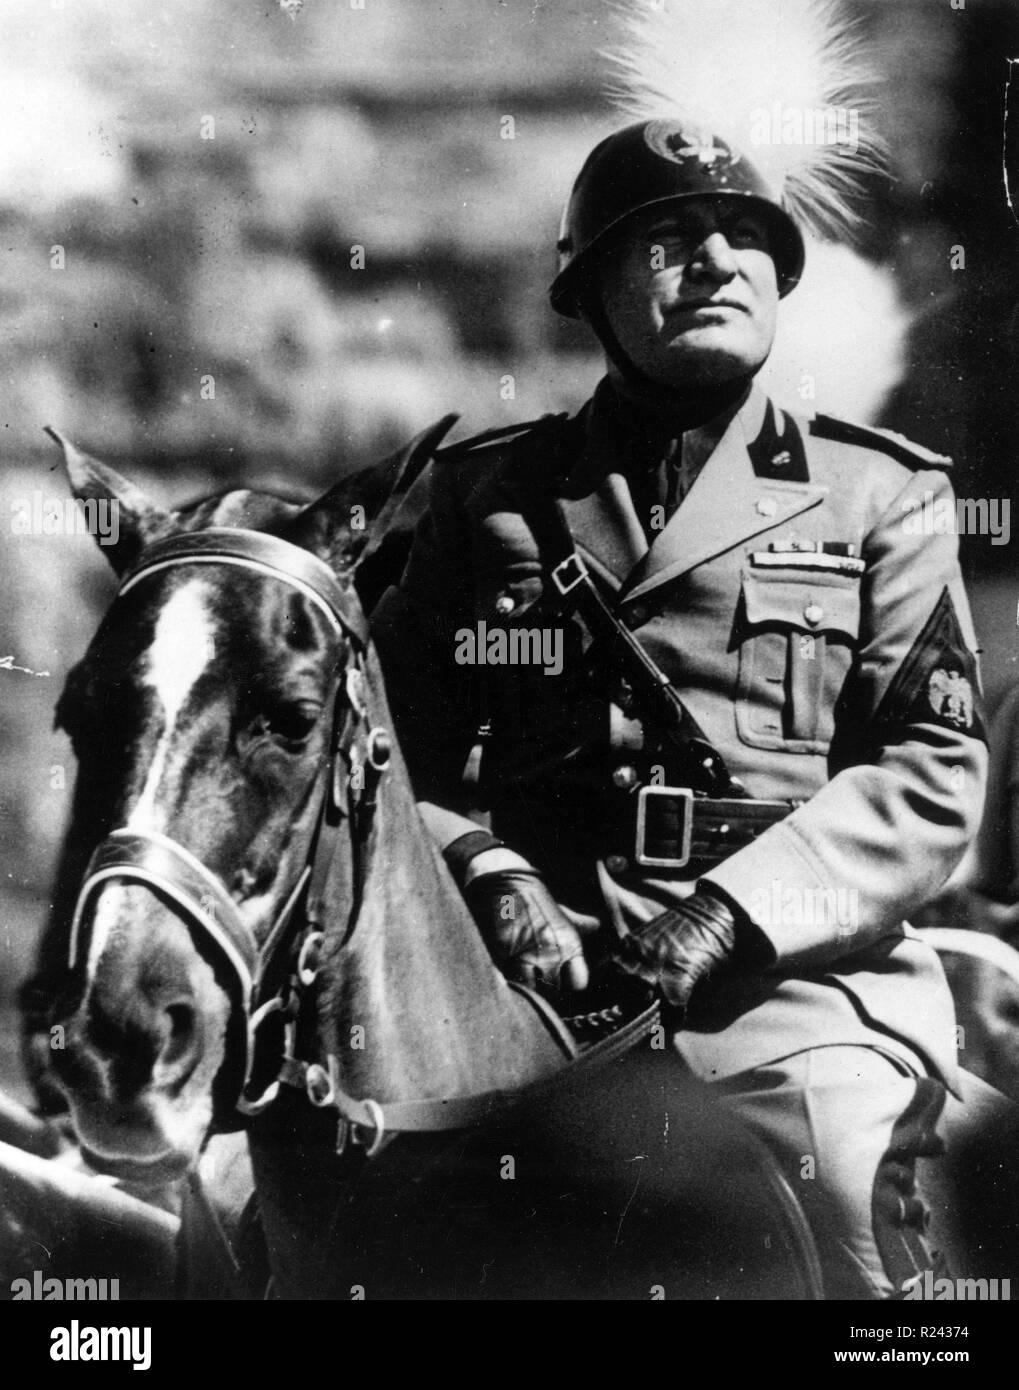 Benito Mussolini (1883-1945) Italian politician, journalist, and leader of the National Fascist Party on horseback in uniform 1936. Stock Photo